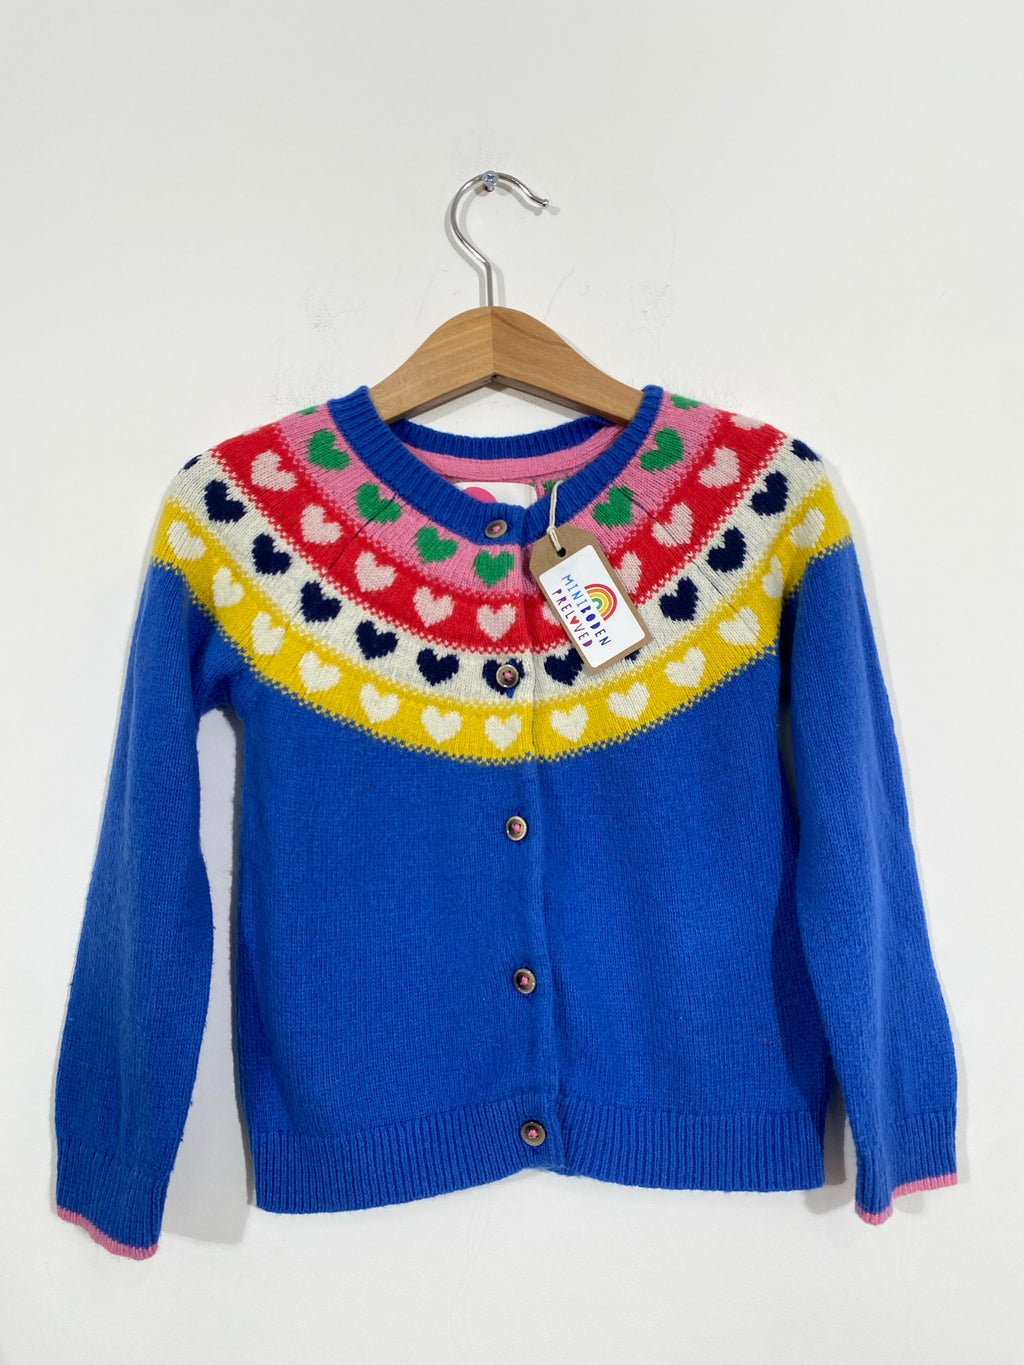 Heart Patterned Blue Cardigan (3-4 Years)